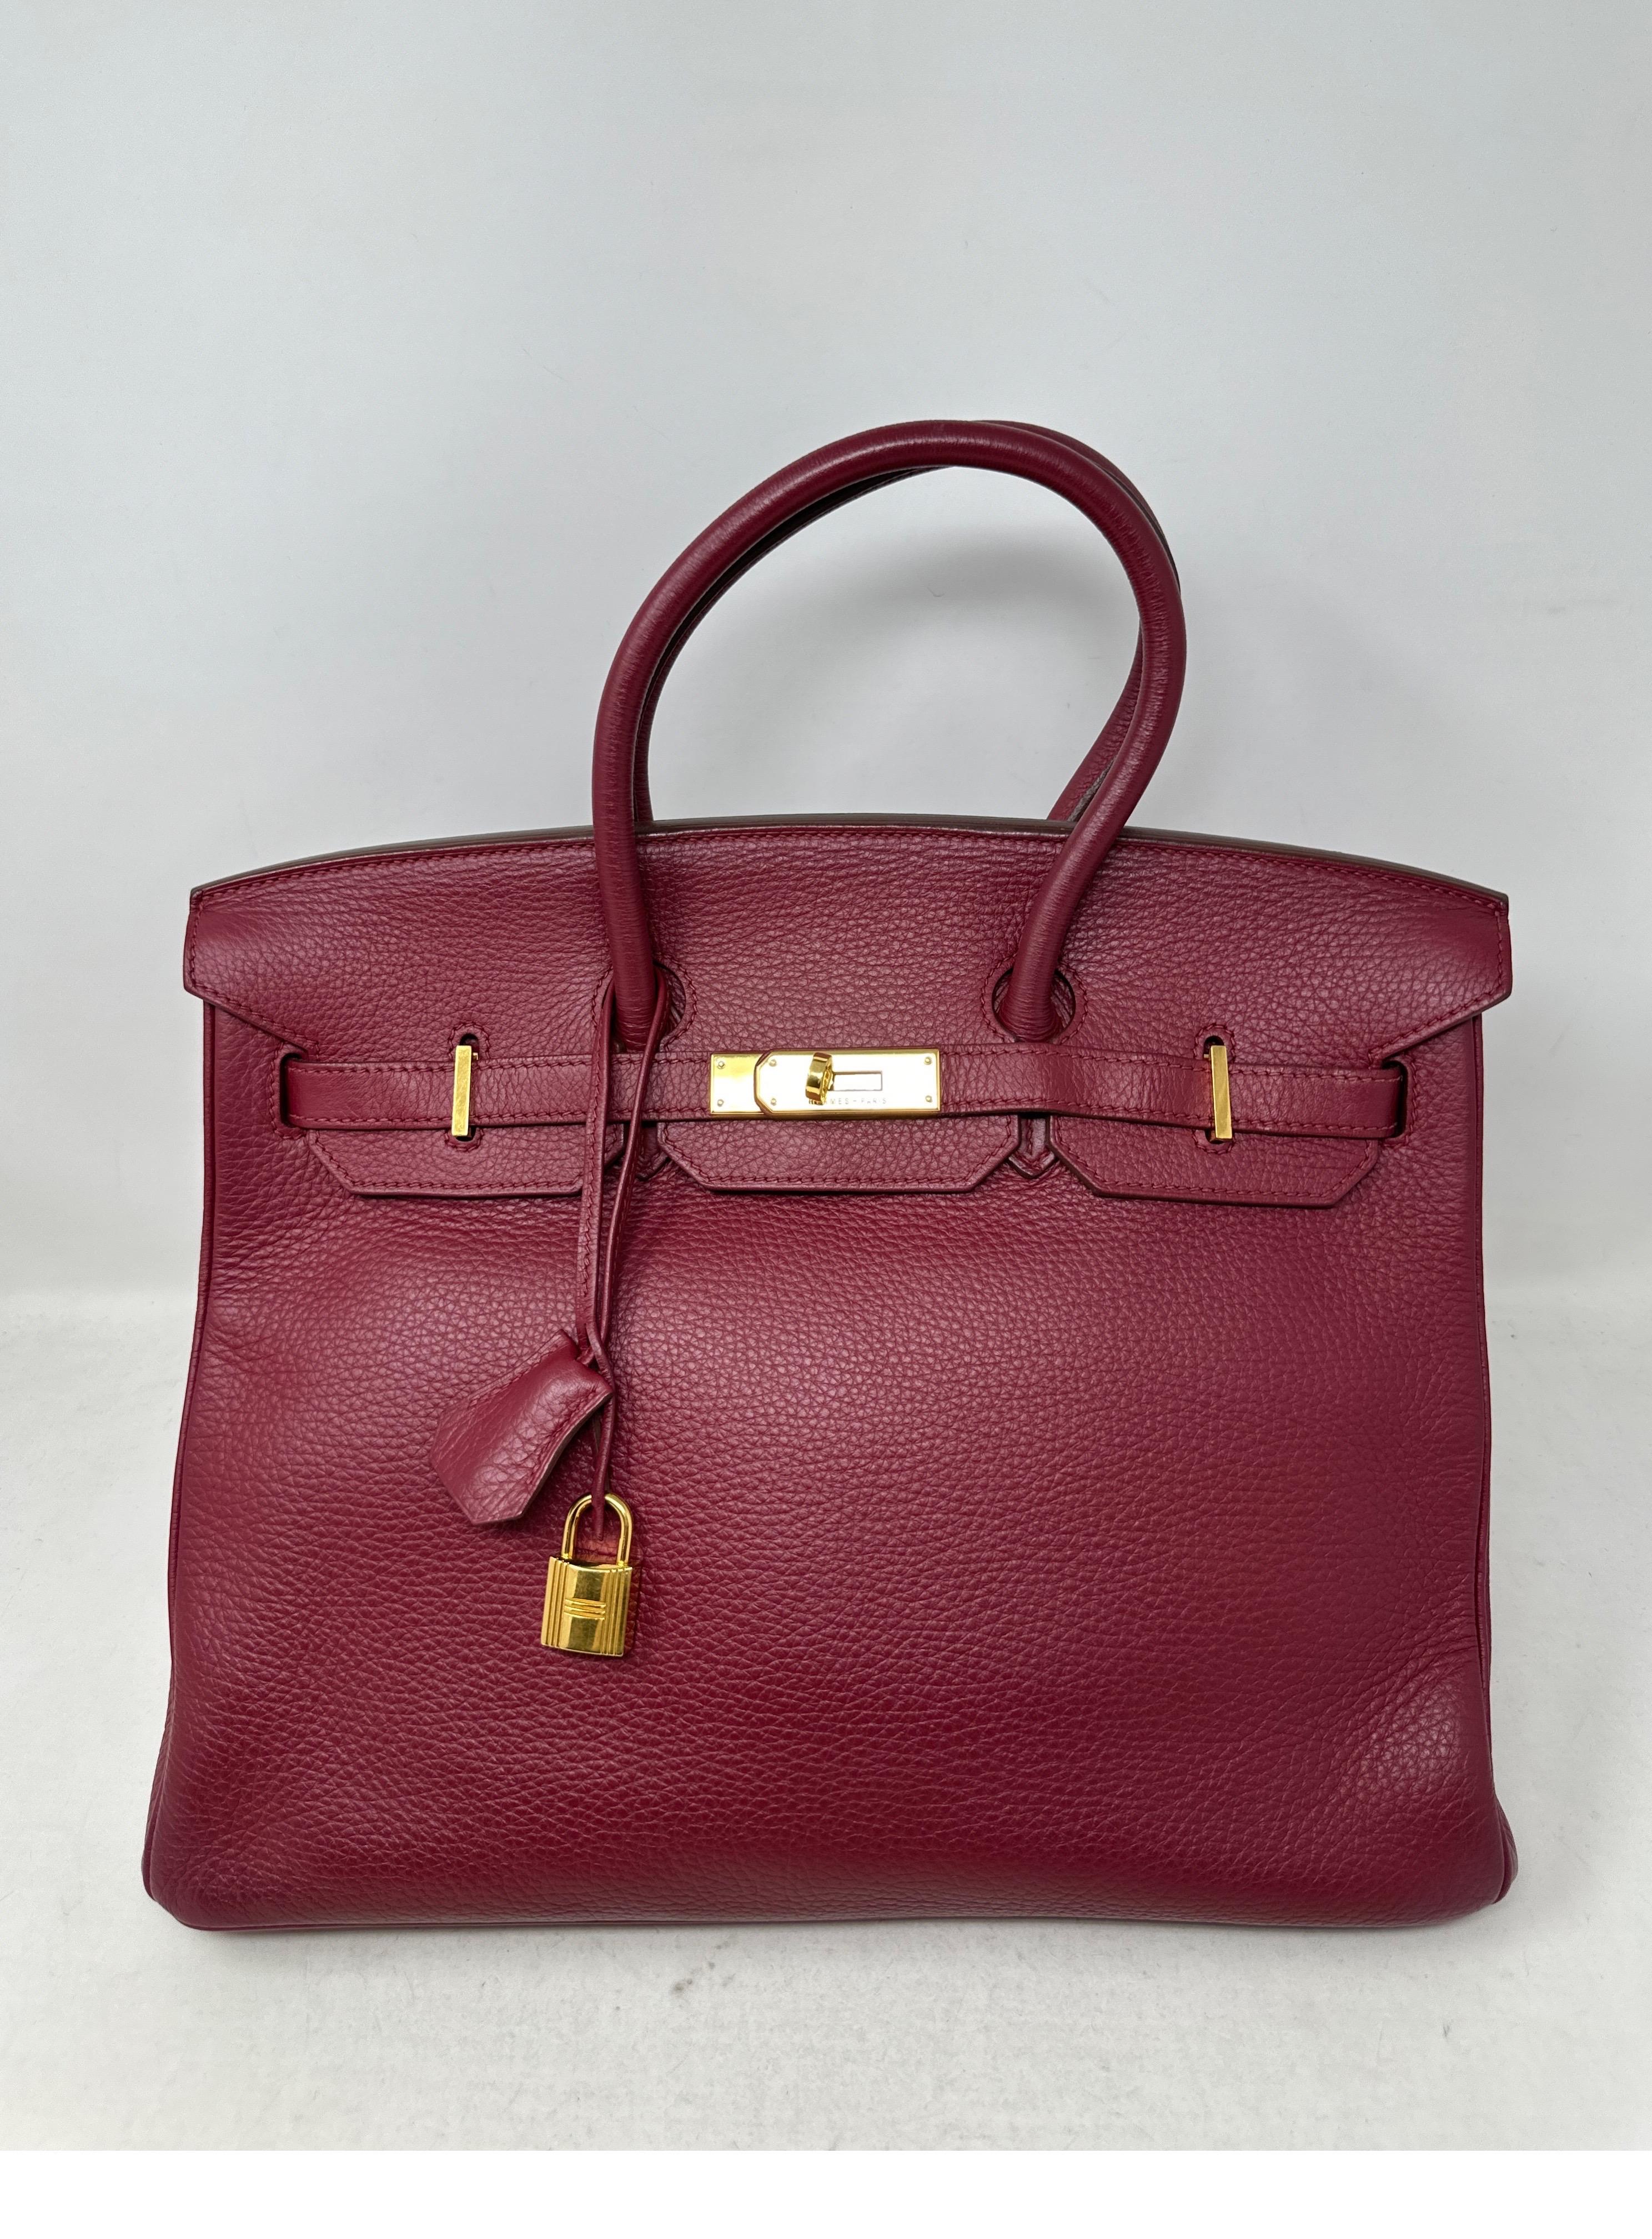 Hermes Rouge Birkin 35 Bag. Rich burgundy color leather with gold hardware. Interior clean. Includes clochette, lock, keys, and dust bag. Guaranteed authentic. 